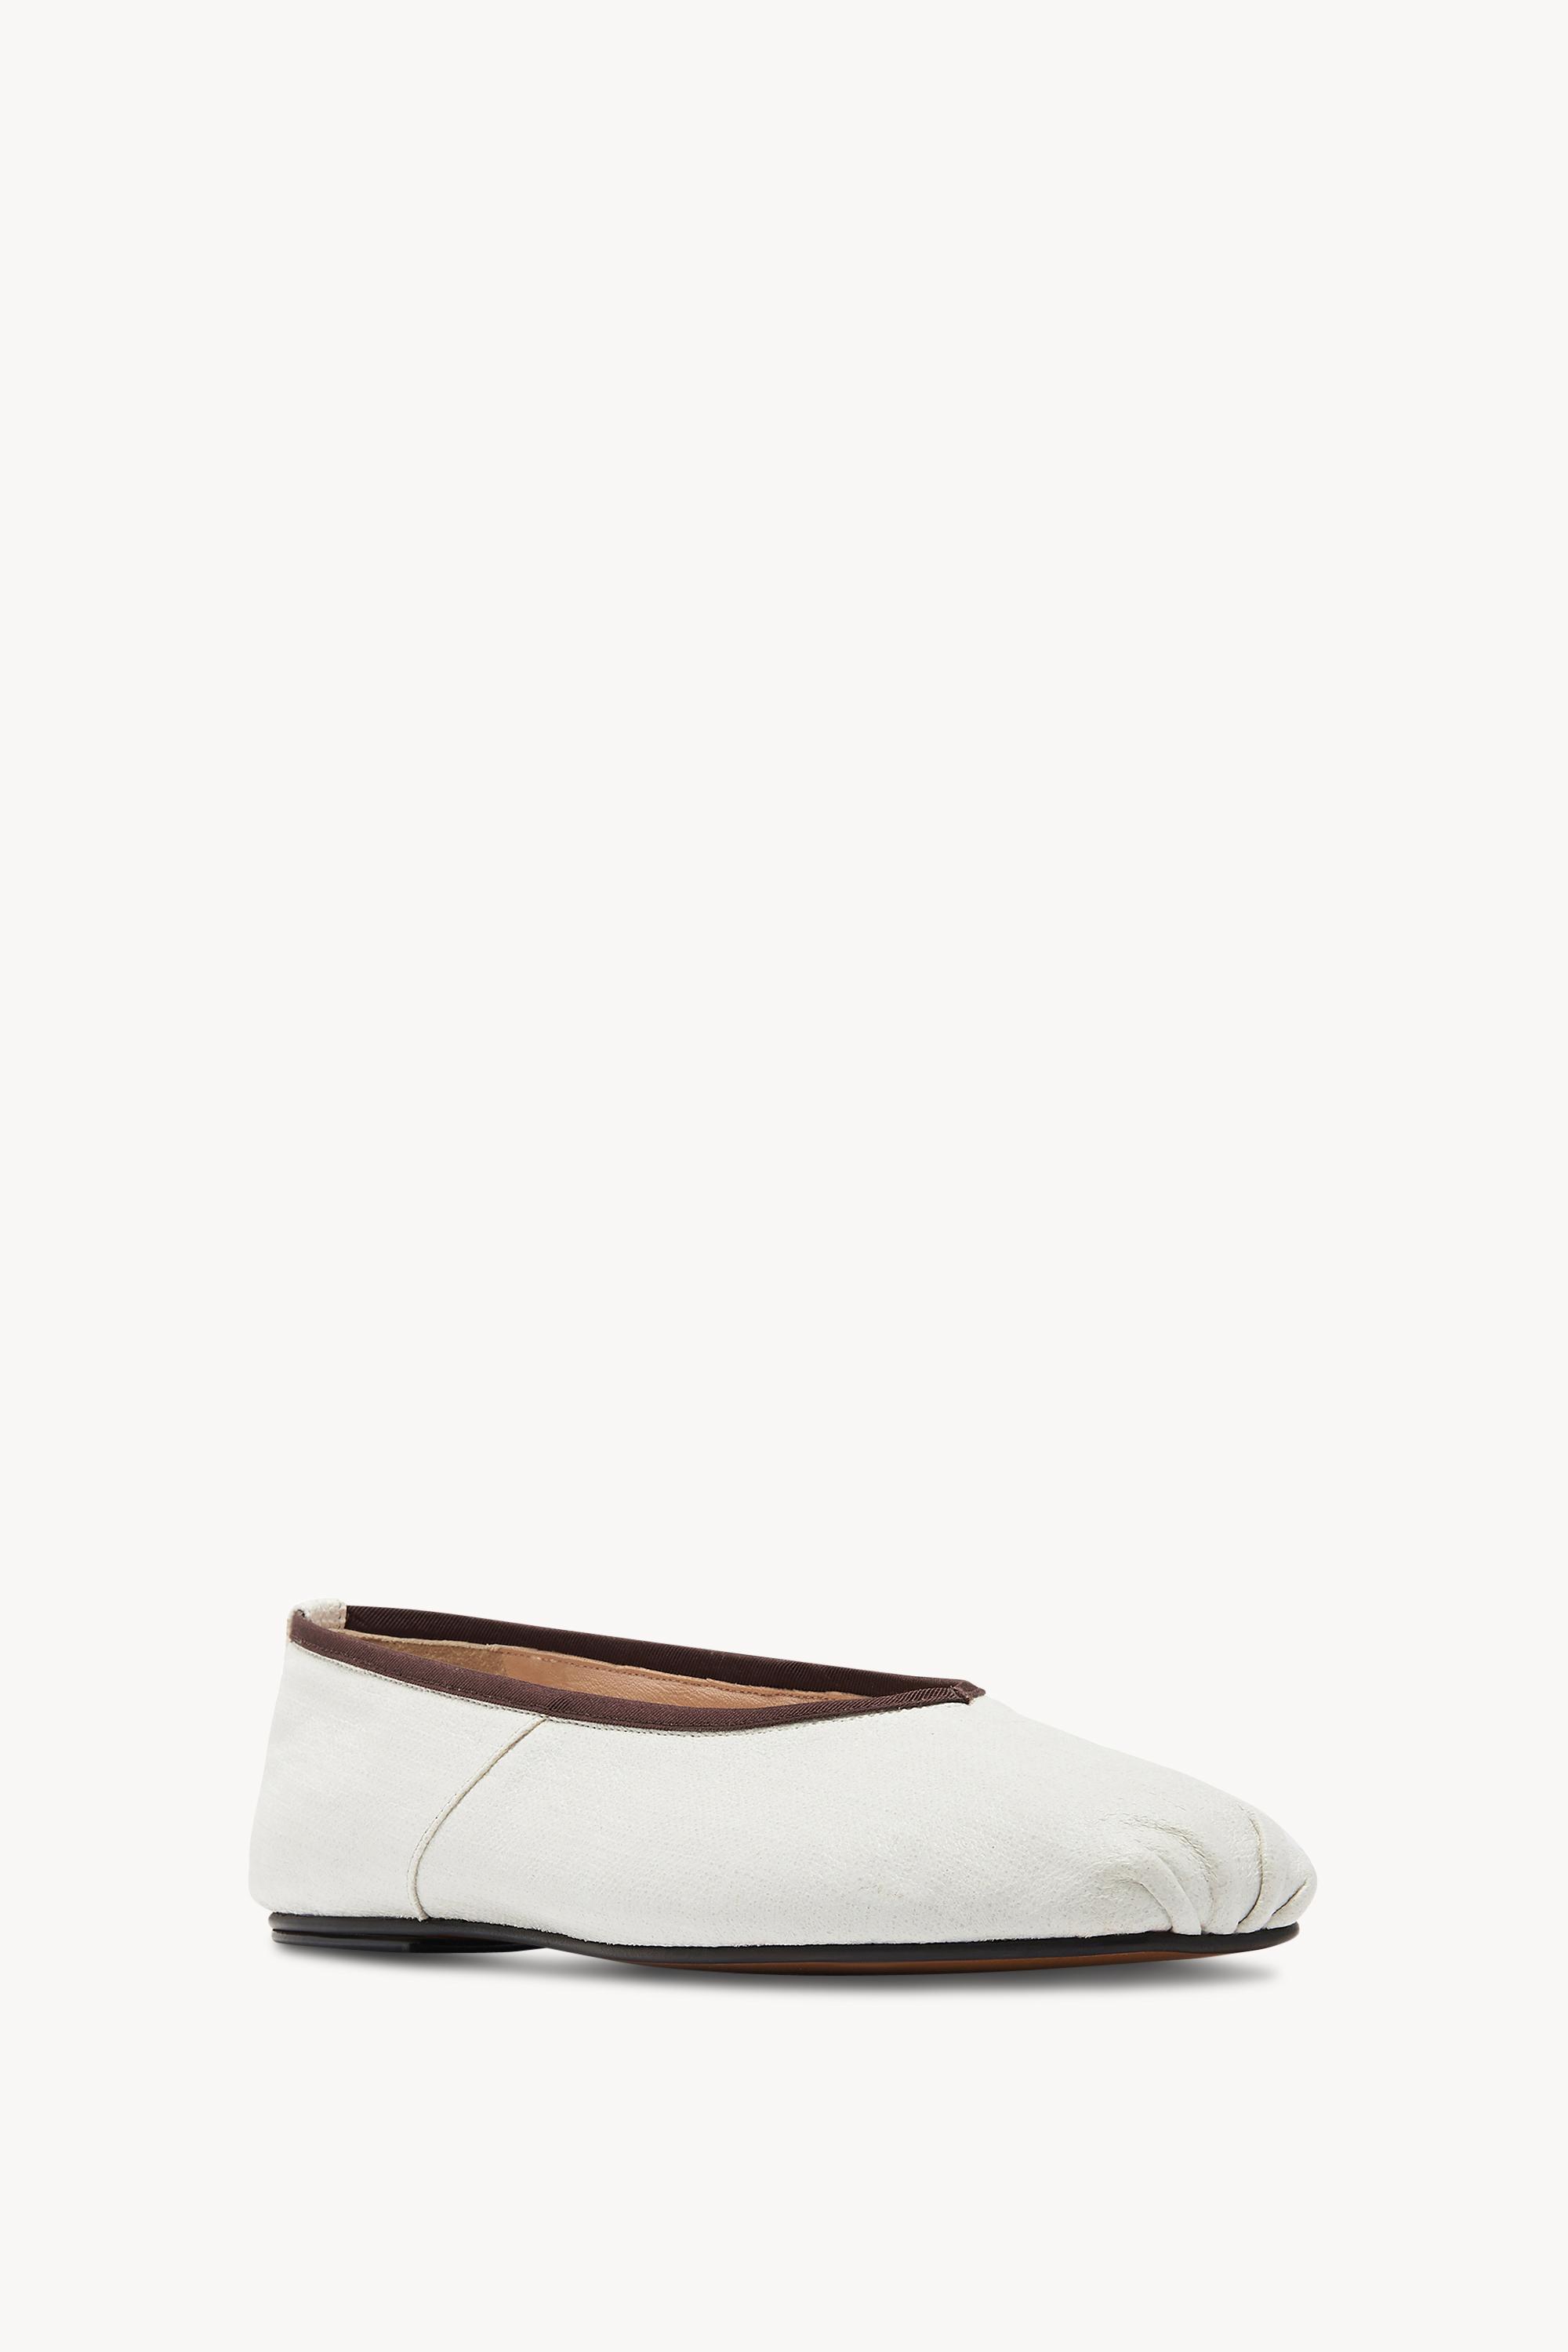 The Row Ballet Slipper In Canvas in White - Lyst